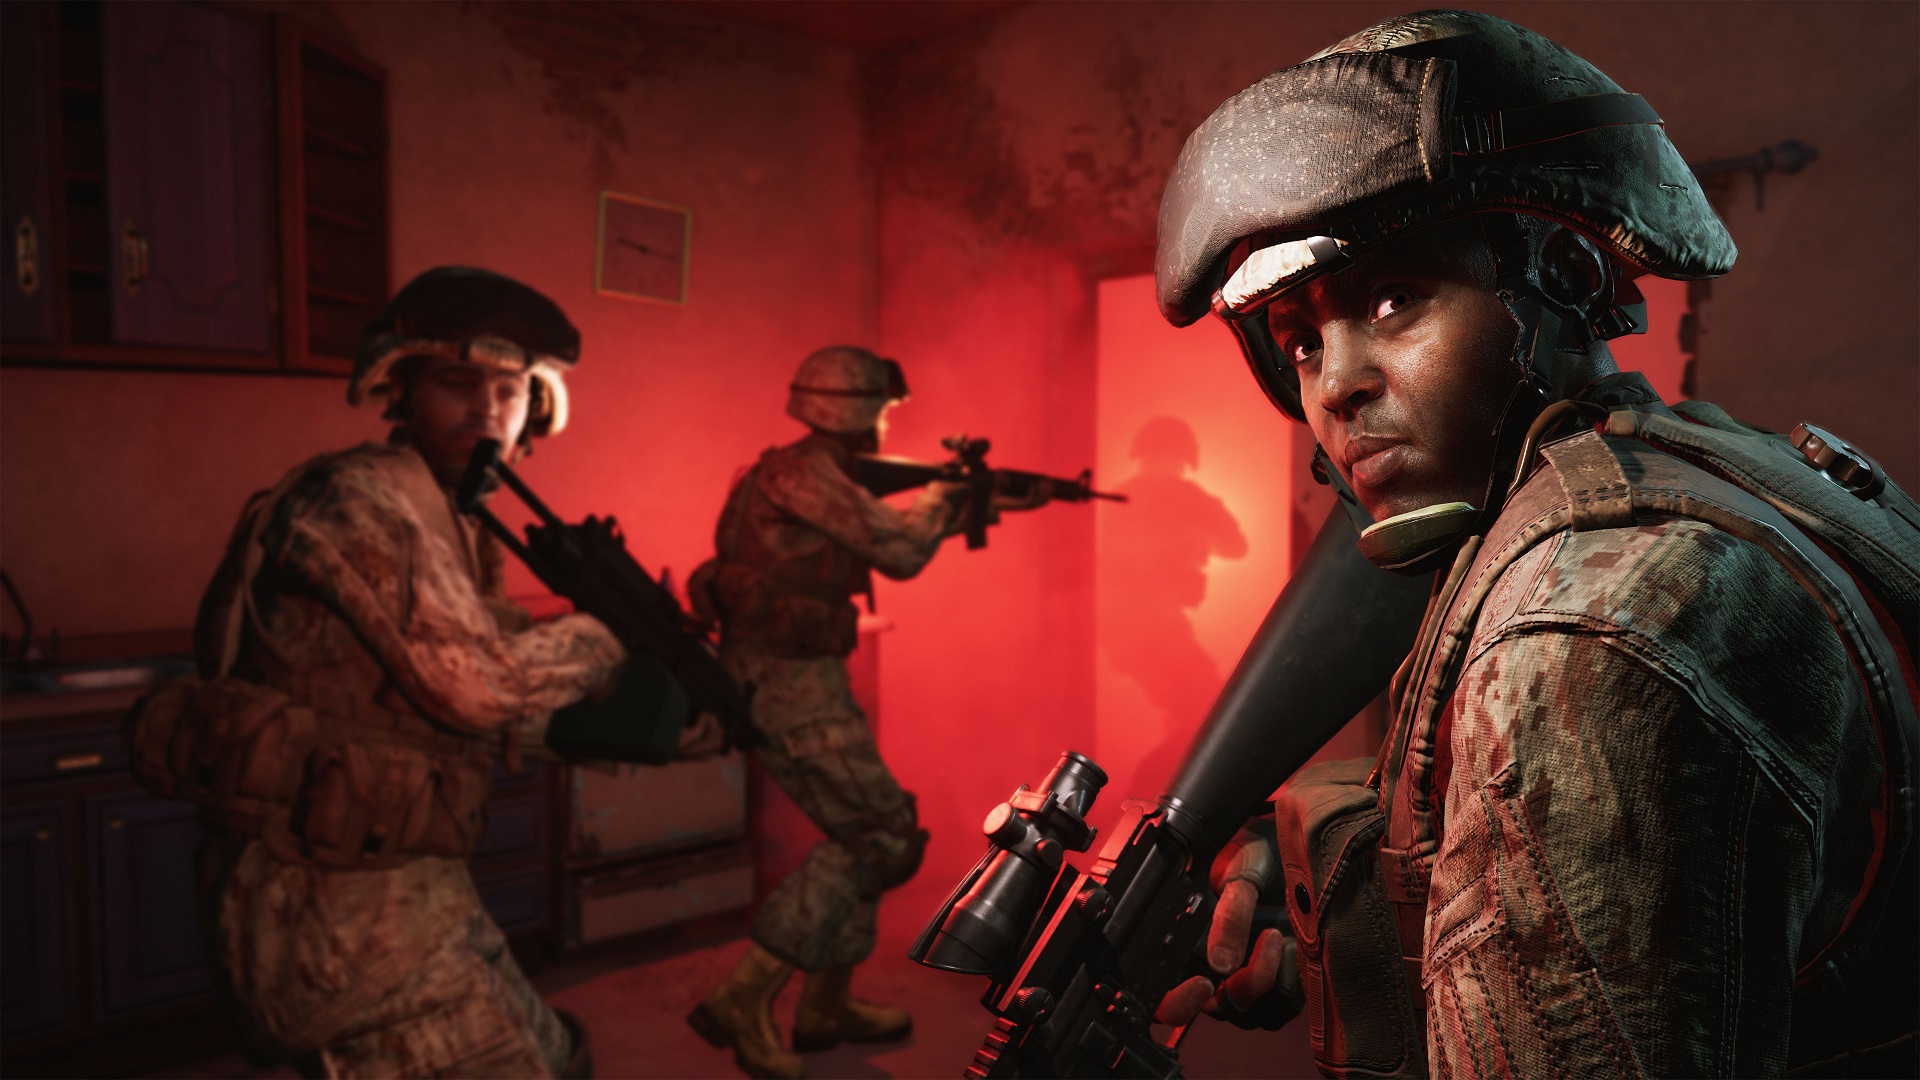 How Six Days in Fallujah is bringing realism back to shooters